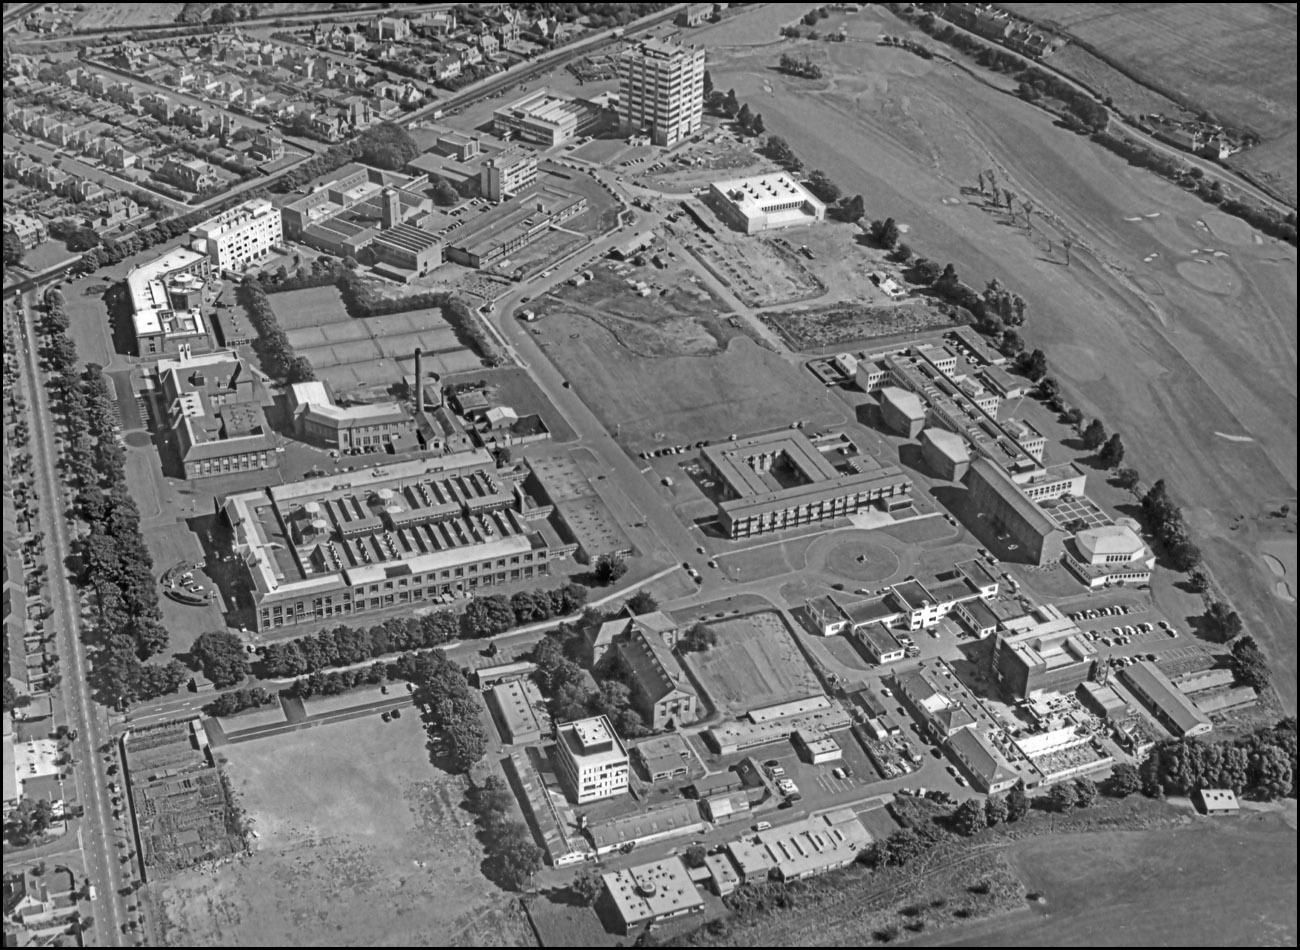 An aerial photograph of The King's Buildings campus in 1969